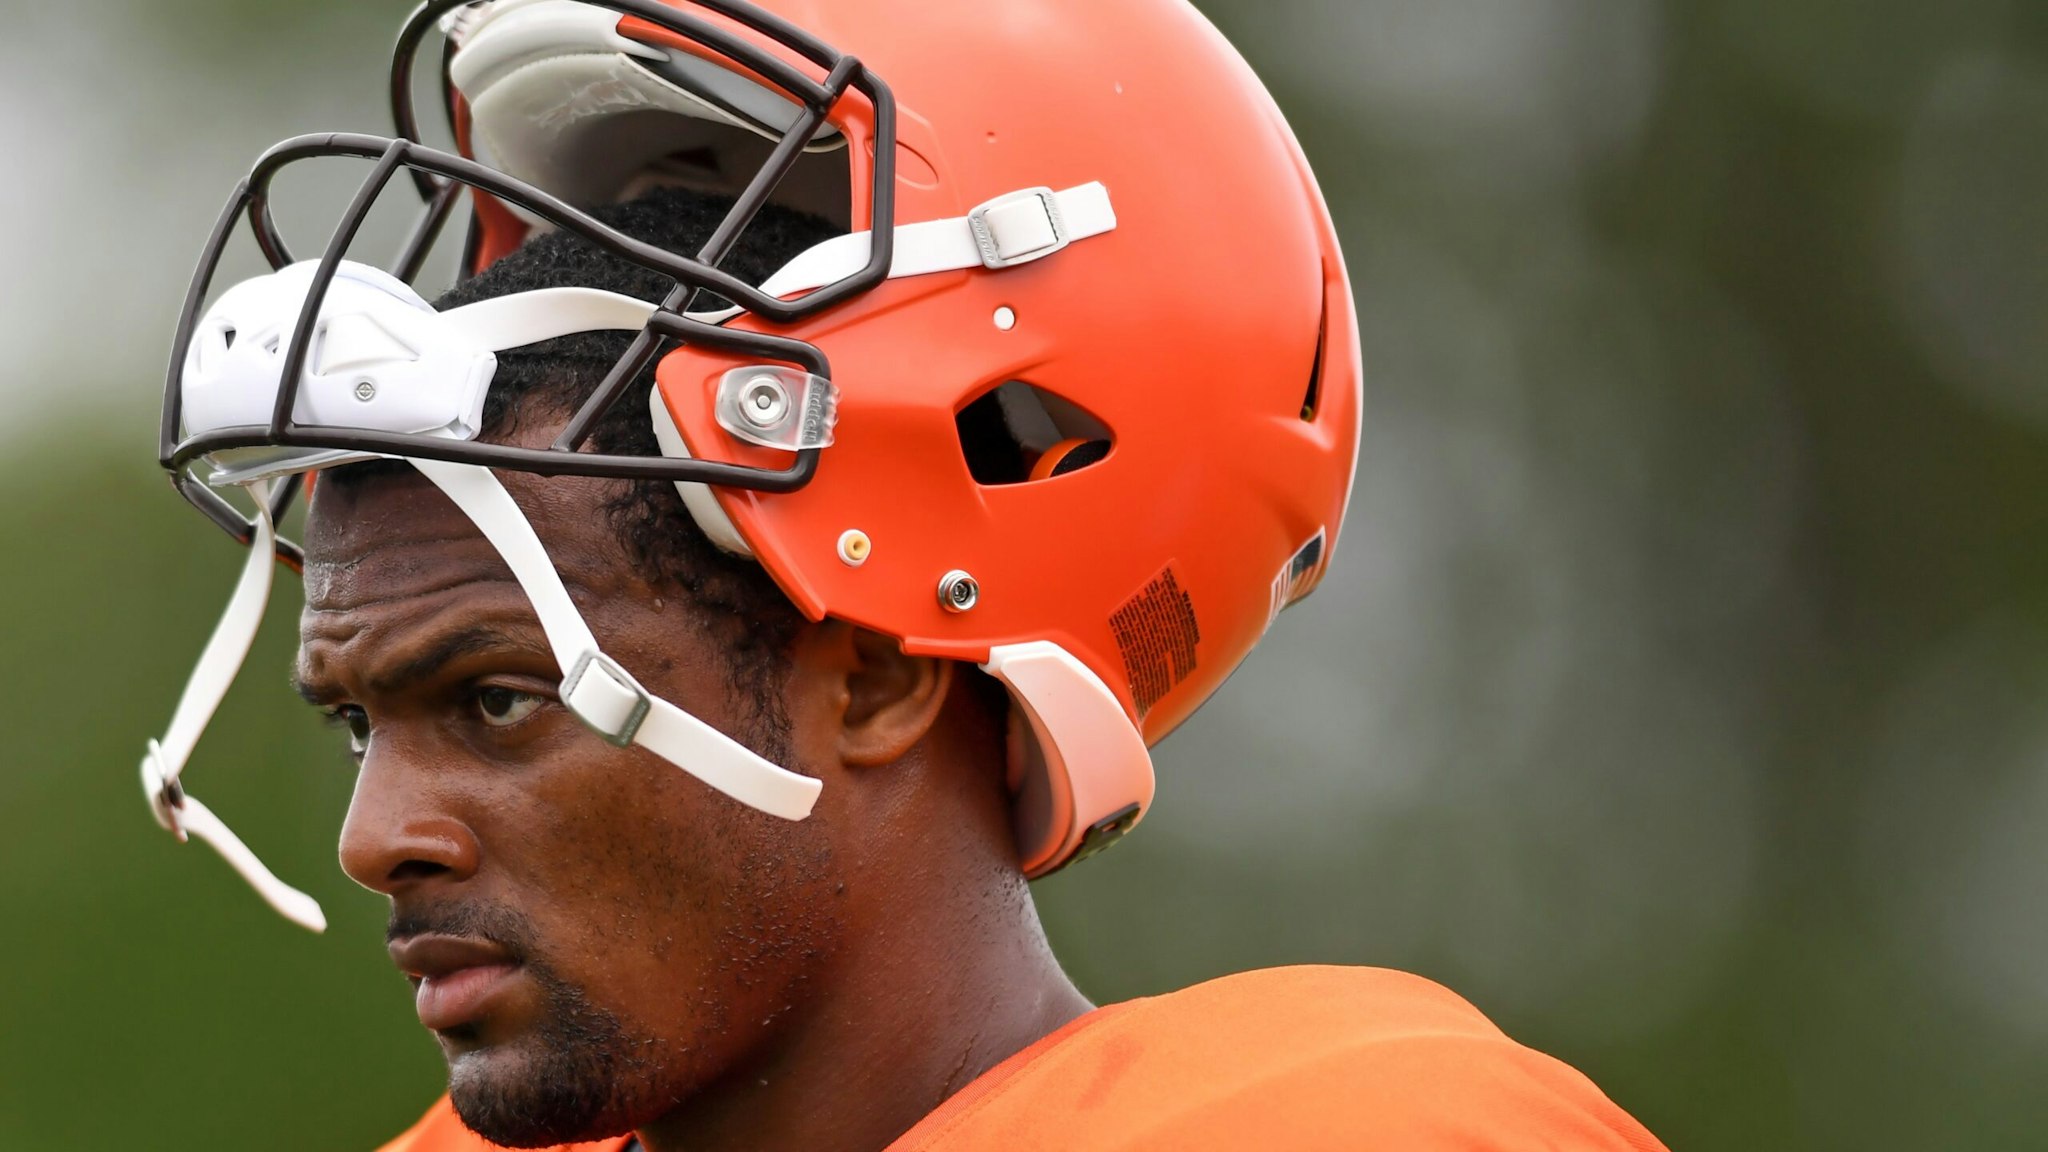 BEREA, OH - AUGUST 09: Deshaun Watson #4 of the Cleveland Browns looks on during Cleveland Browns training camp at CrossCountry Mortgage Campus on August 09, 2022 in Berea, Ohio.